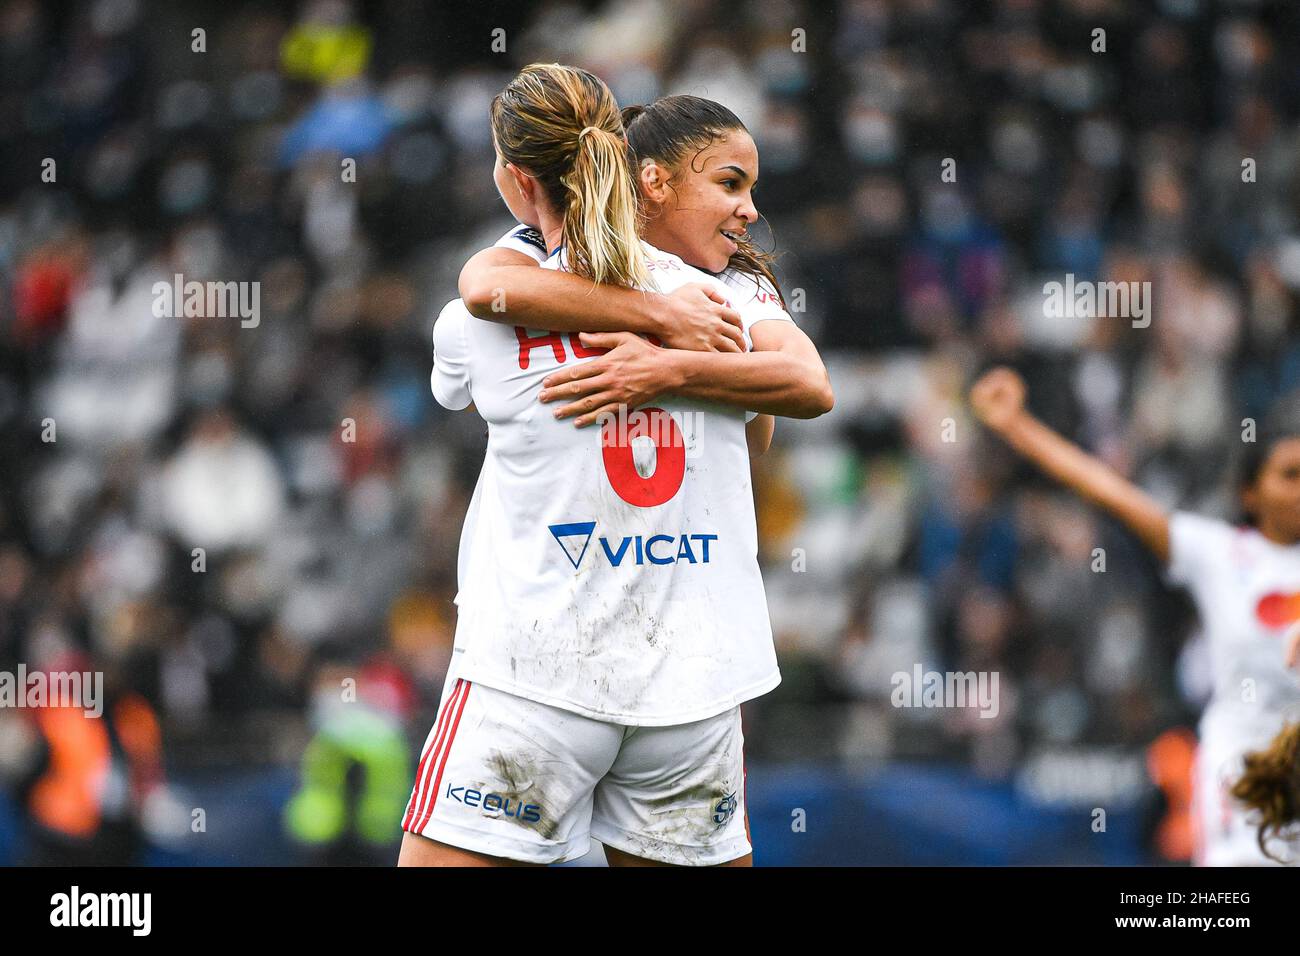 Paris, France. 12th Dec, 2021. Amandine Henry and Delphine Cascarino of Olympique Lyonnais during the Women's French championship, D1 Arkema football match between Paris FC and Olympique Lyonnais (OL) on December 12, 2021 at Charlety Stadium in Paris, France. Photo by Victor Joly/ABACAPRESS.COM Credit: Victor Joly/Alamy Live News Stock Photo